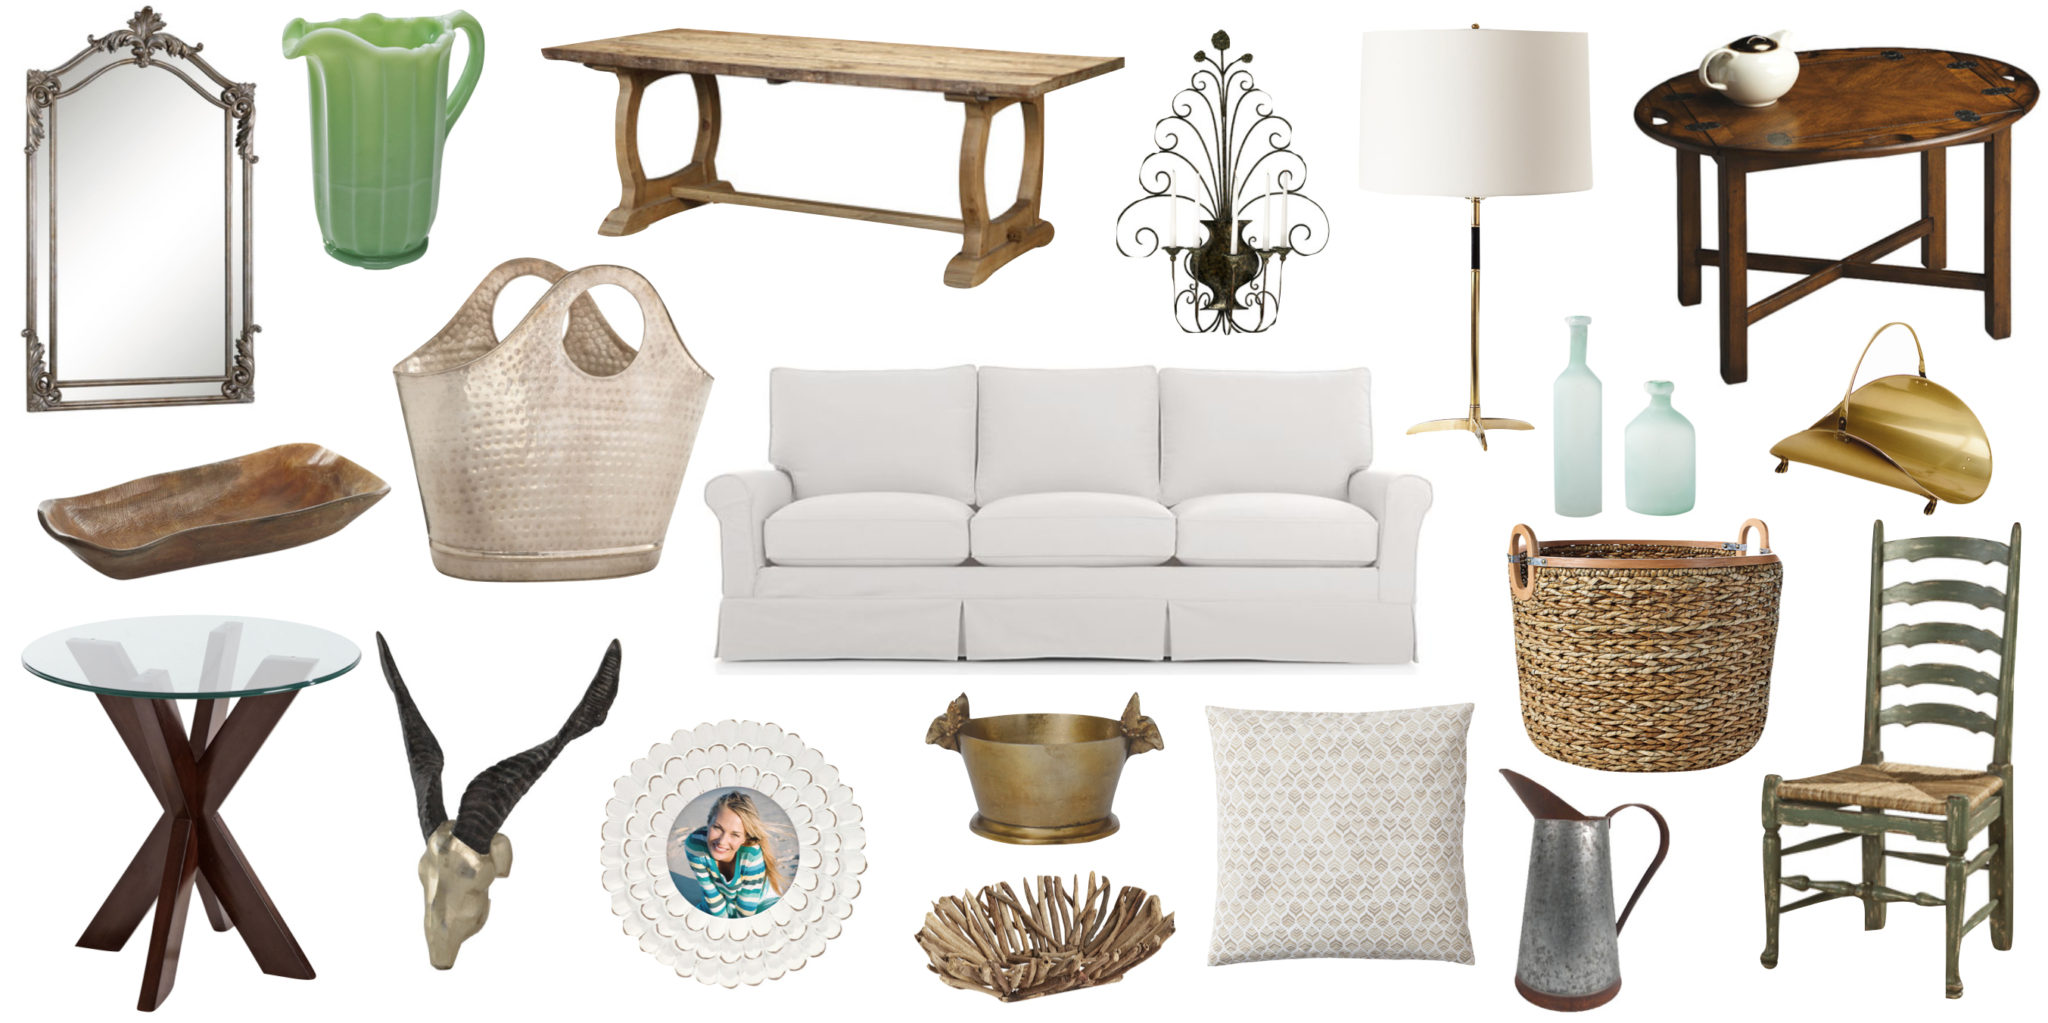 buying guide, featured image, anna kristin, light and airy, yarbrough, southern, family room